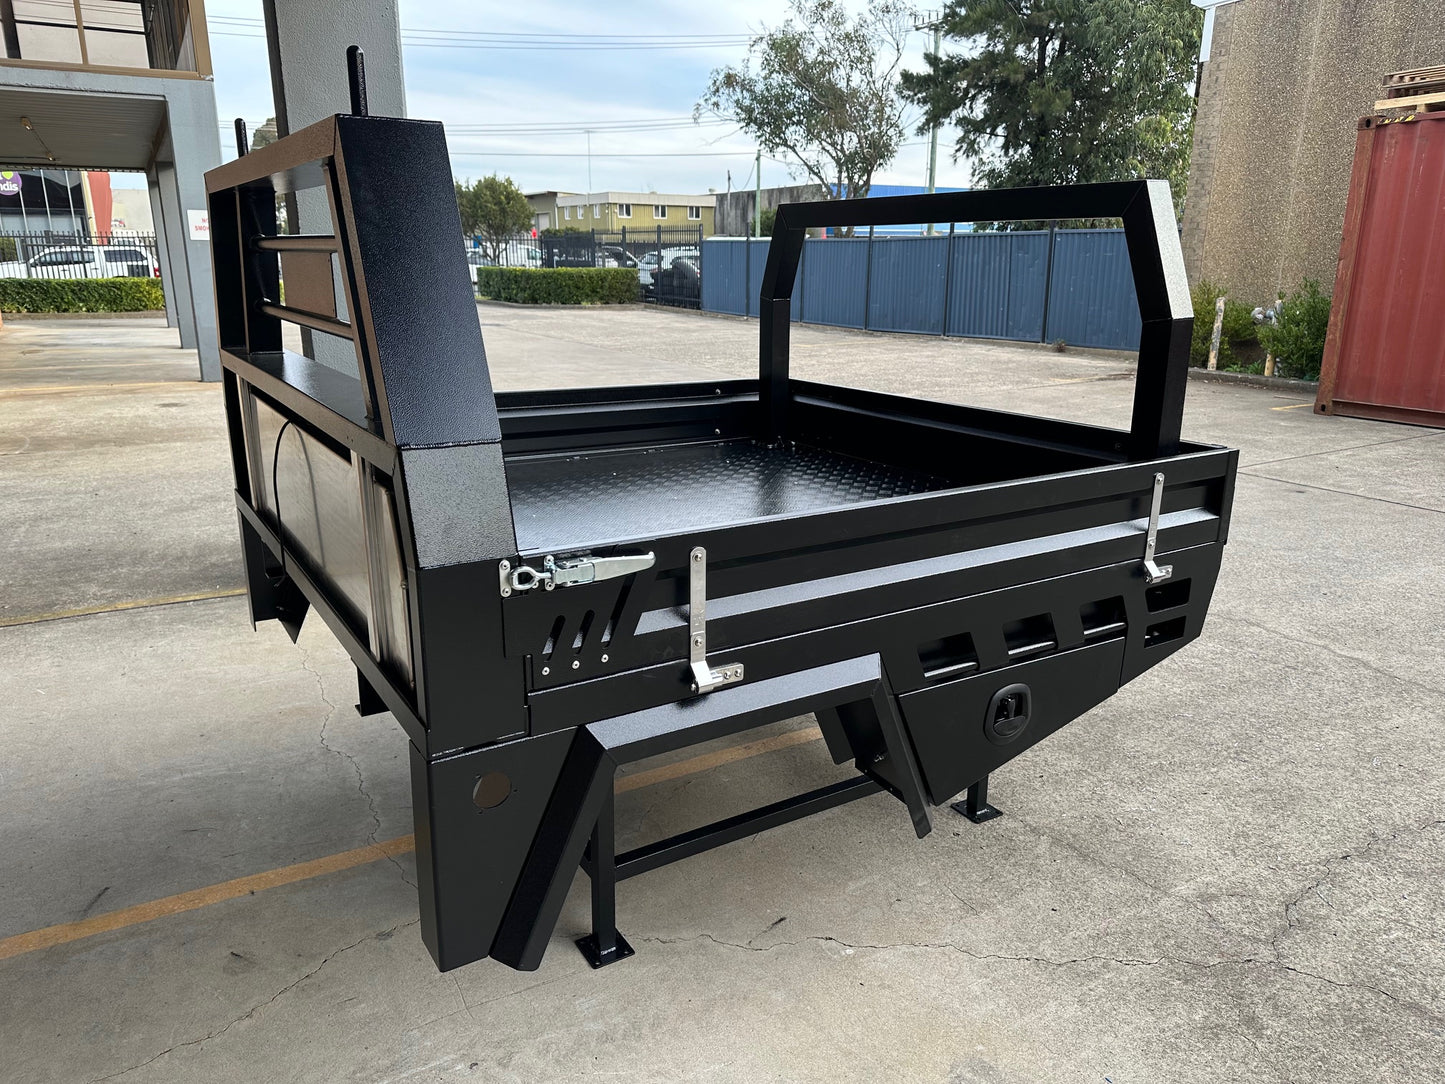 Pre-Orders!!! Heavy Duty Aluminum Tray - Dual Cab, Space Cab, Single Cab - Powder Coated in Black